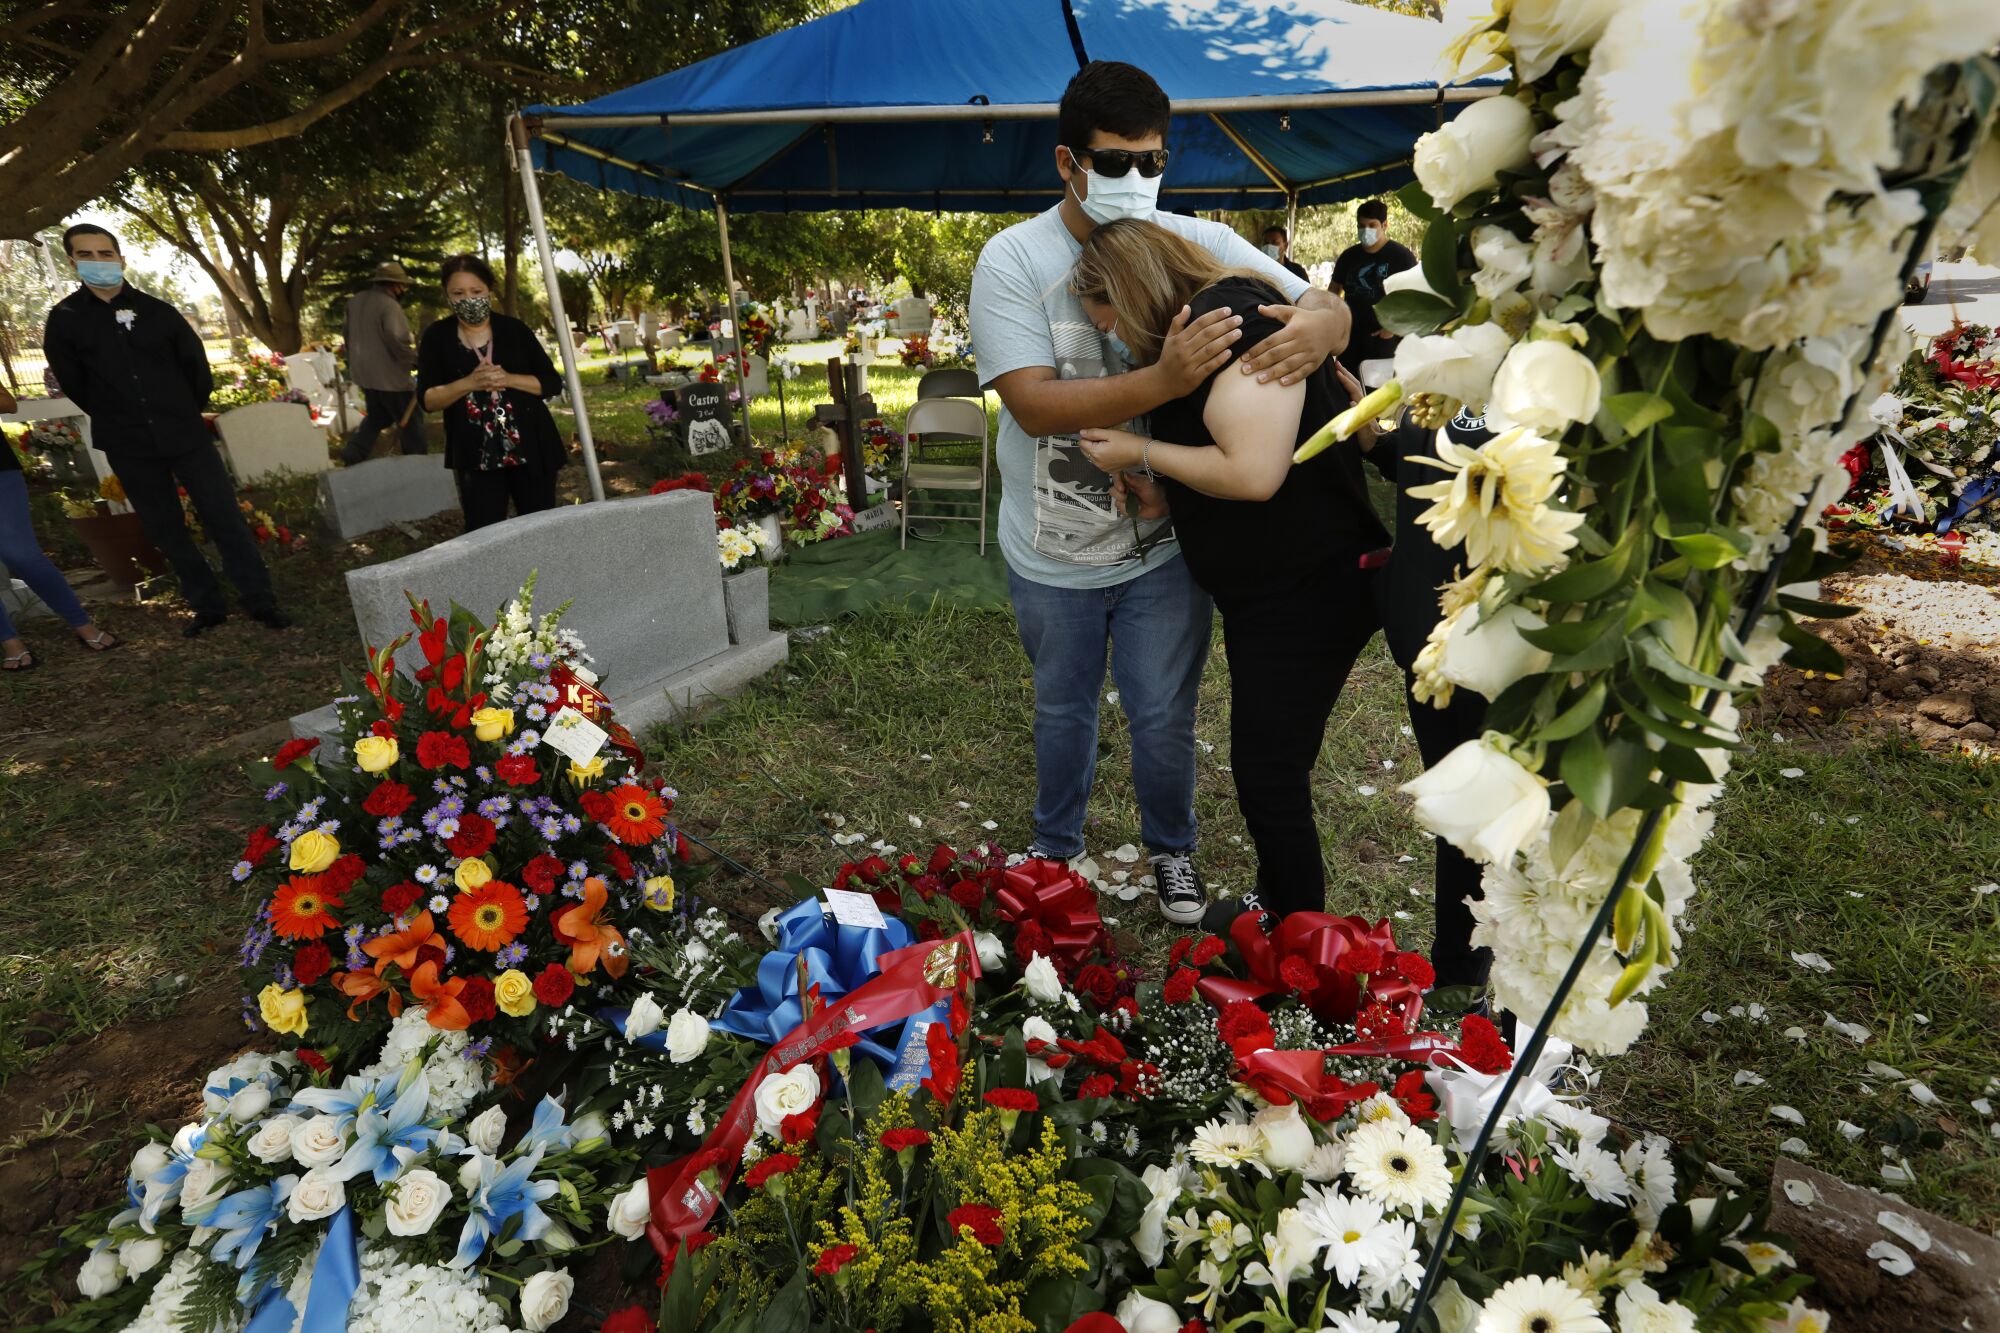 Family members mourn at a gravesite at La Piedad Cemetery in McAllen, Texas.